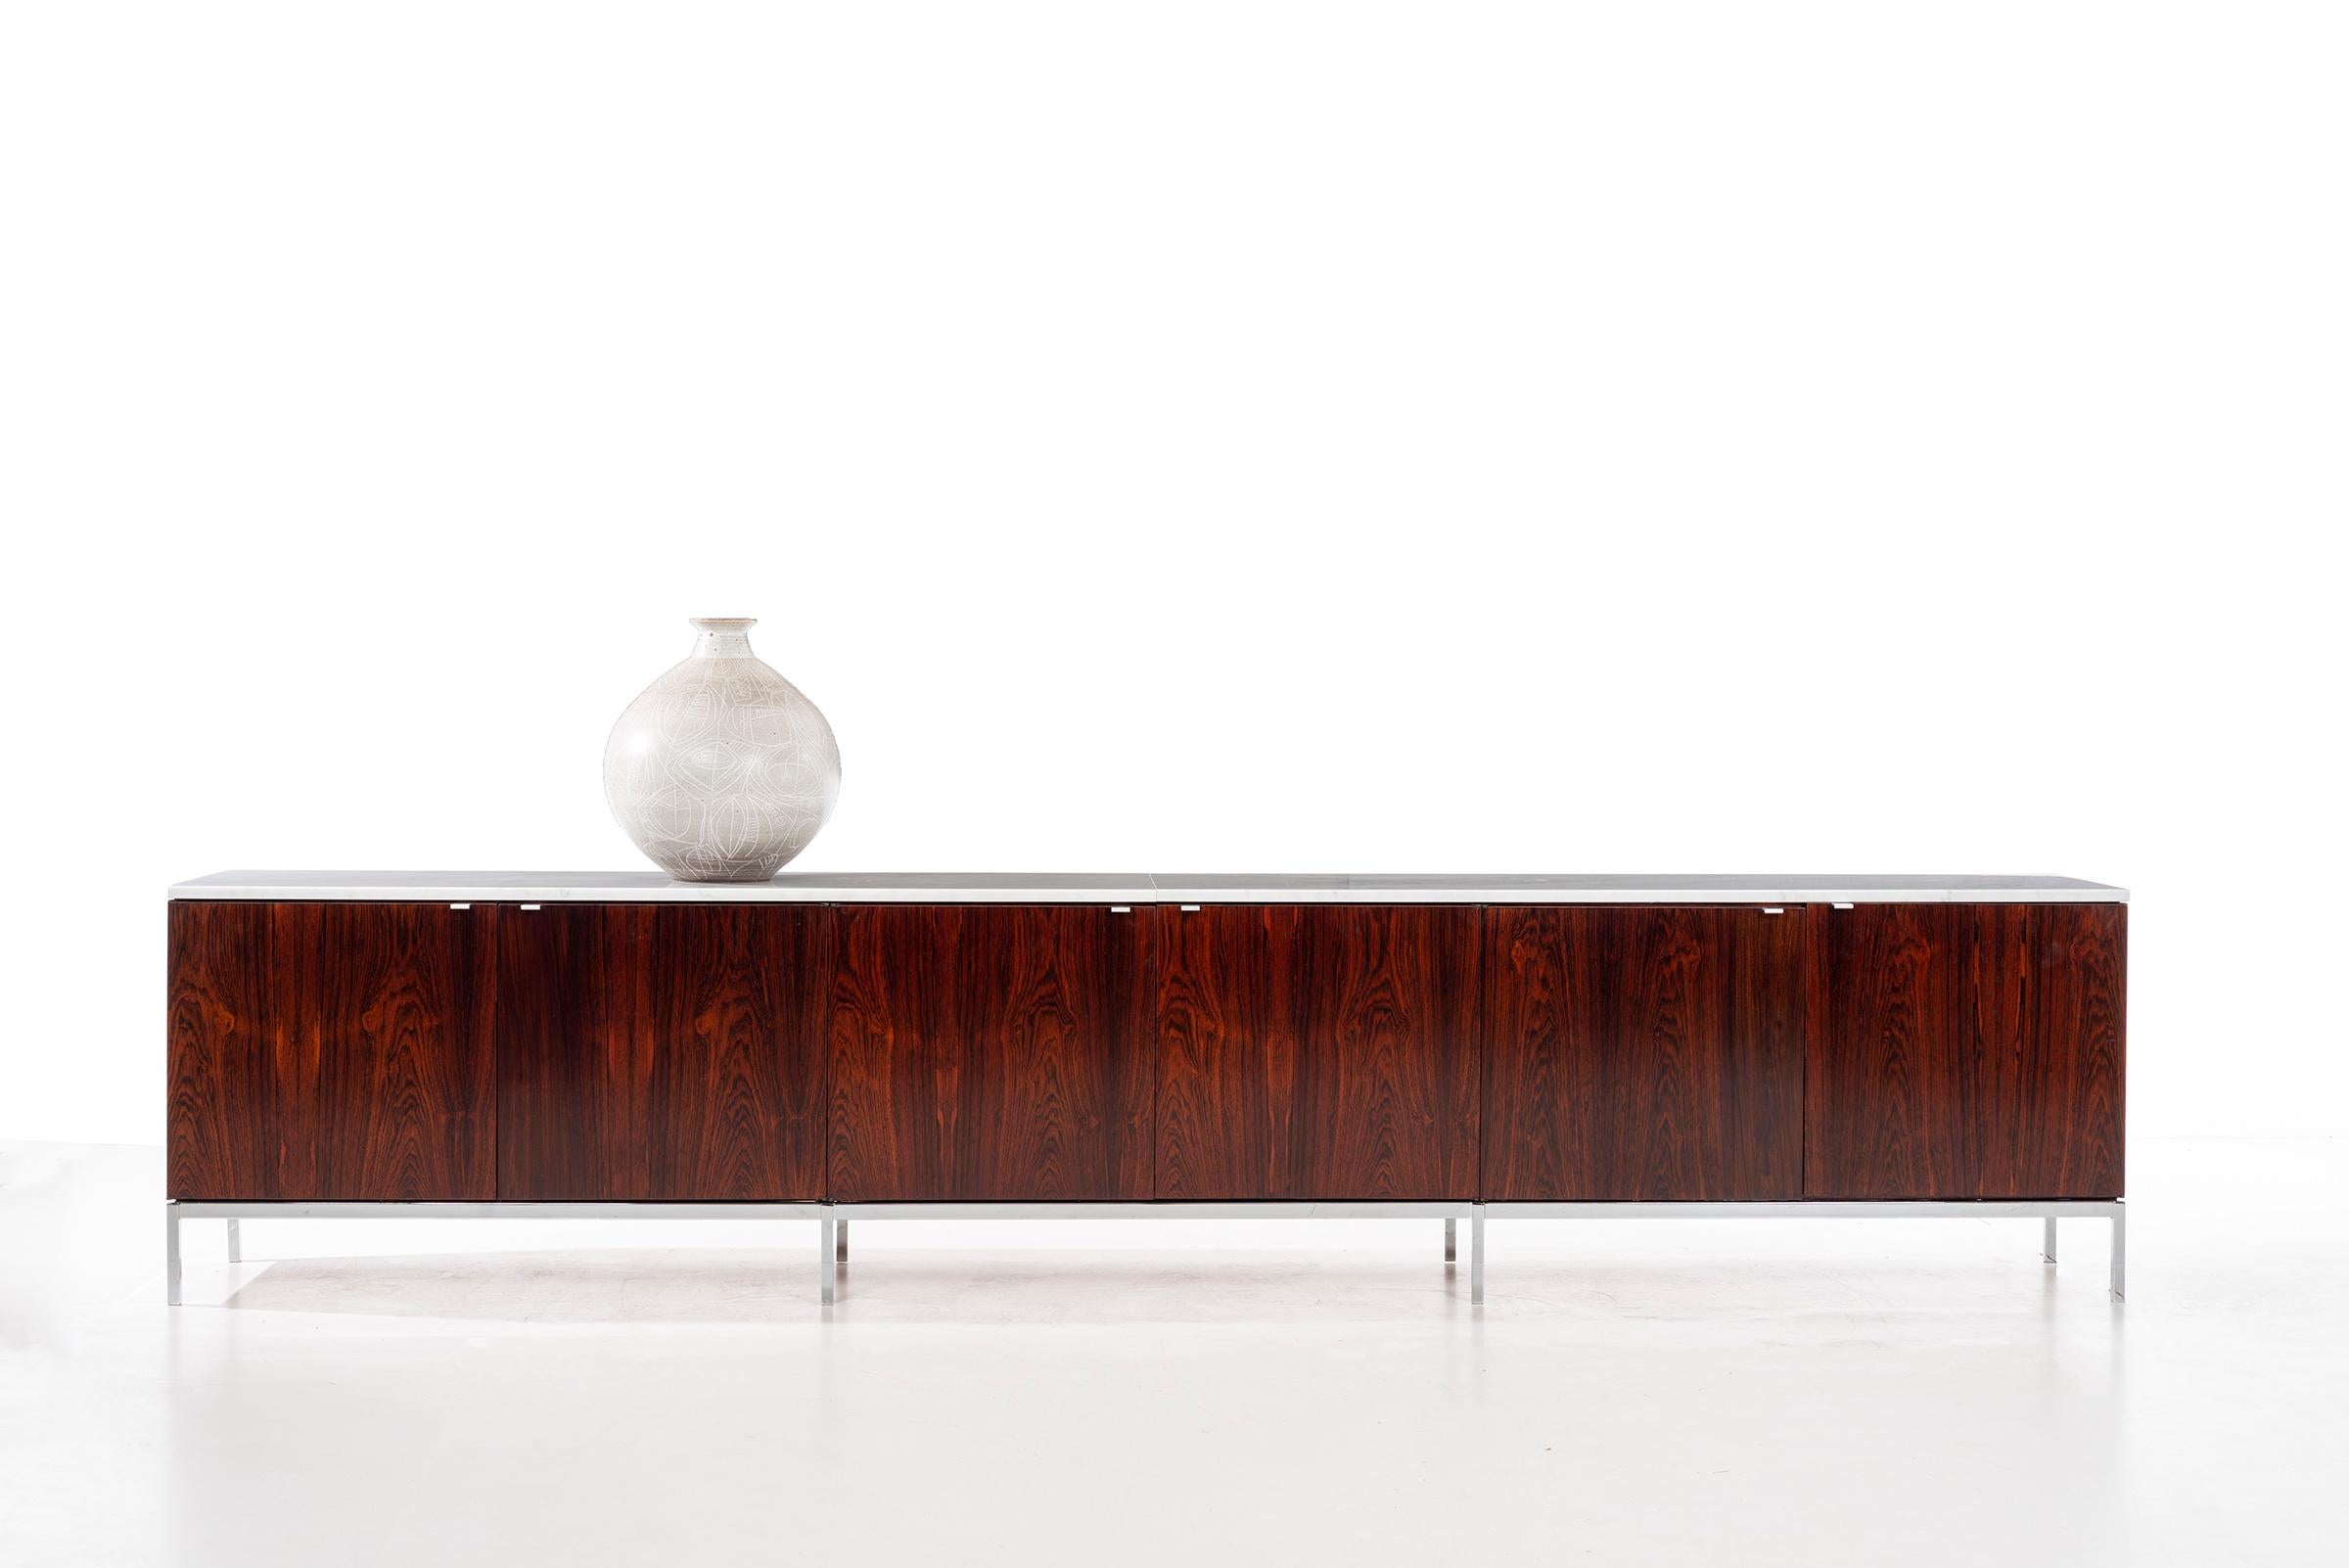 Florence Knoll design for Knoll International, Credenza from a Palm Springs, California residence. (large vase by Clyde Burt, sold separately)
Features, heavily figured Brazilian rosewood veneer.
Custom length 120